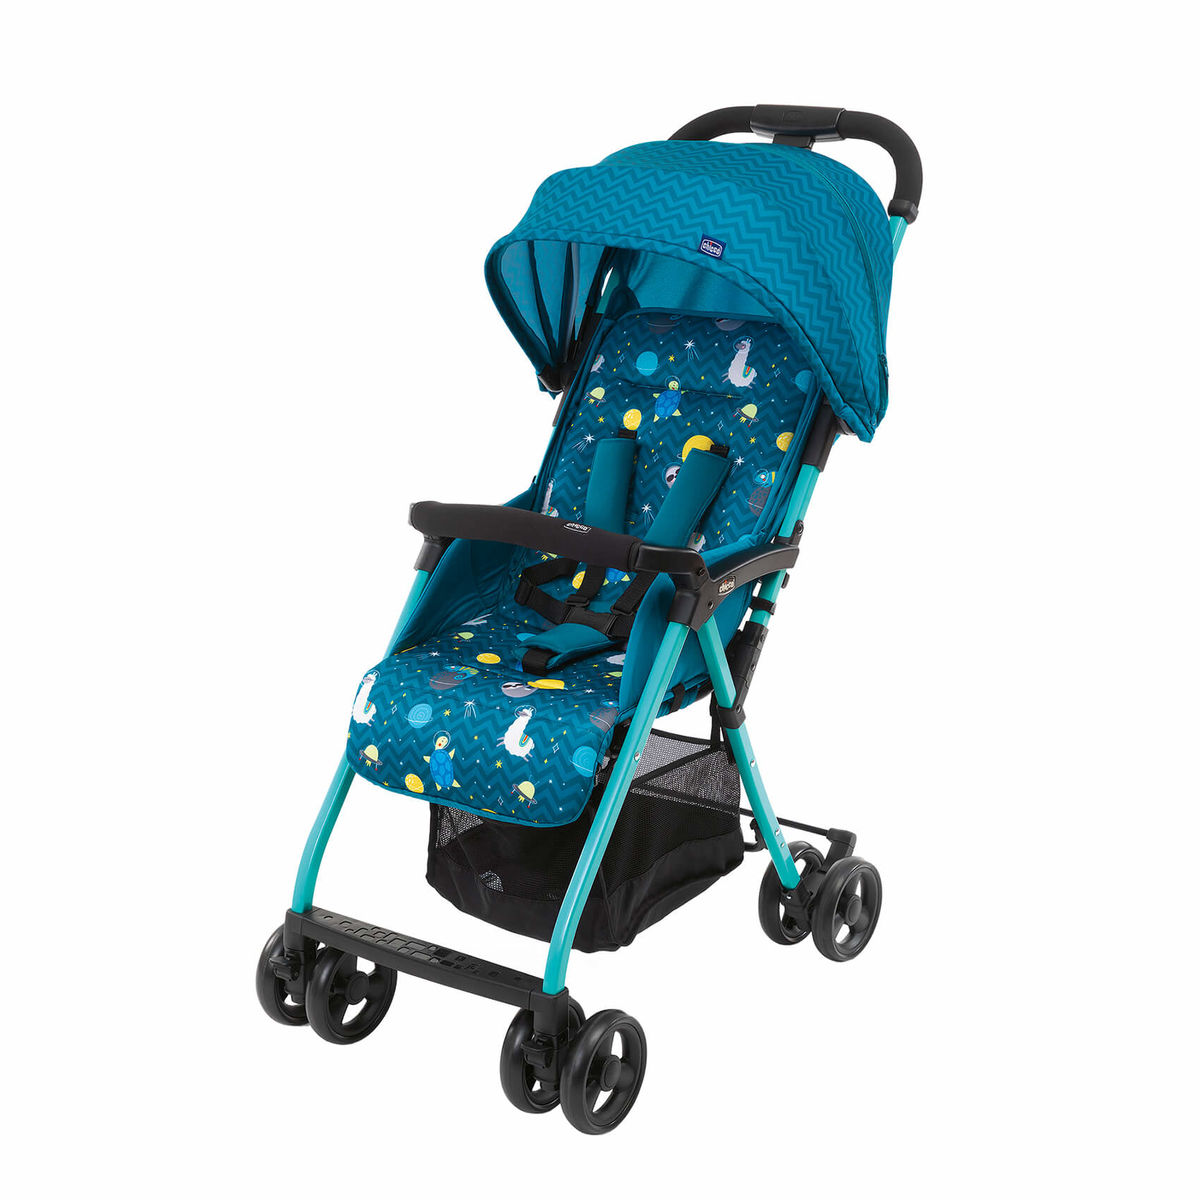 Image of Chicco Ohlalà3 Kinderwagen Sloth in Space bei nettoshop.ch